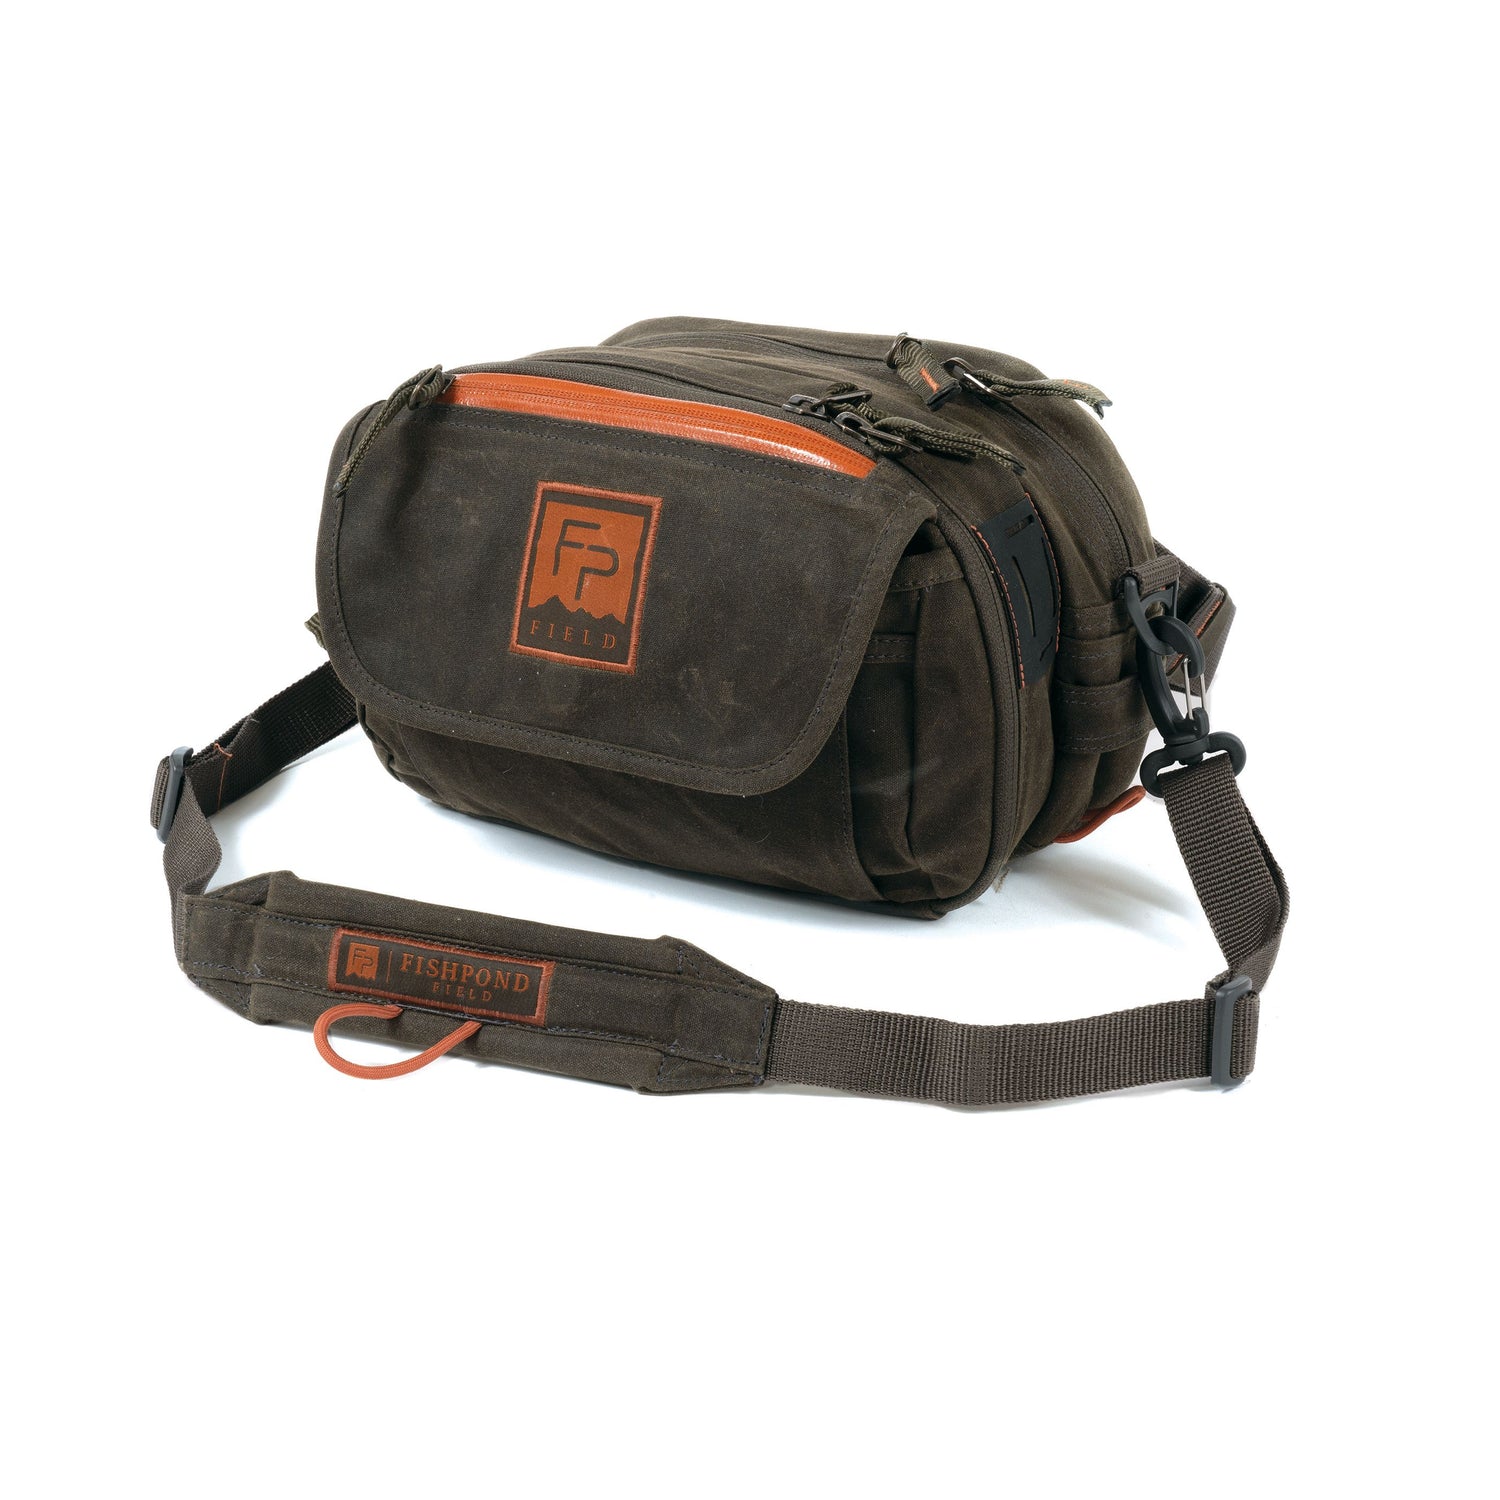  Peat Moss Blue River Chest/Lumbar Pack Fly Fishing